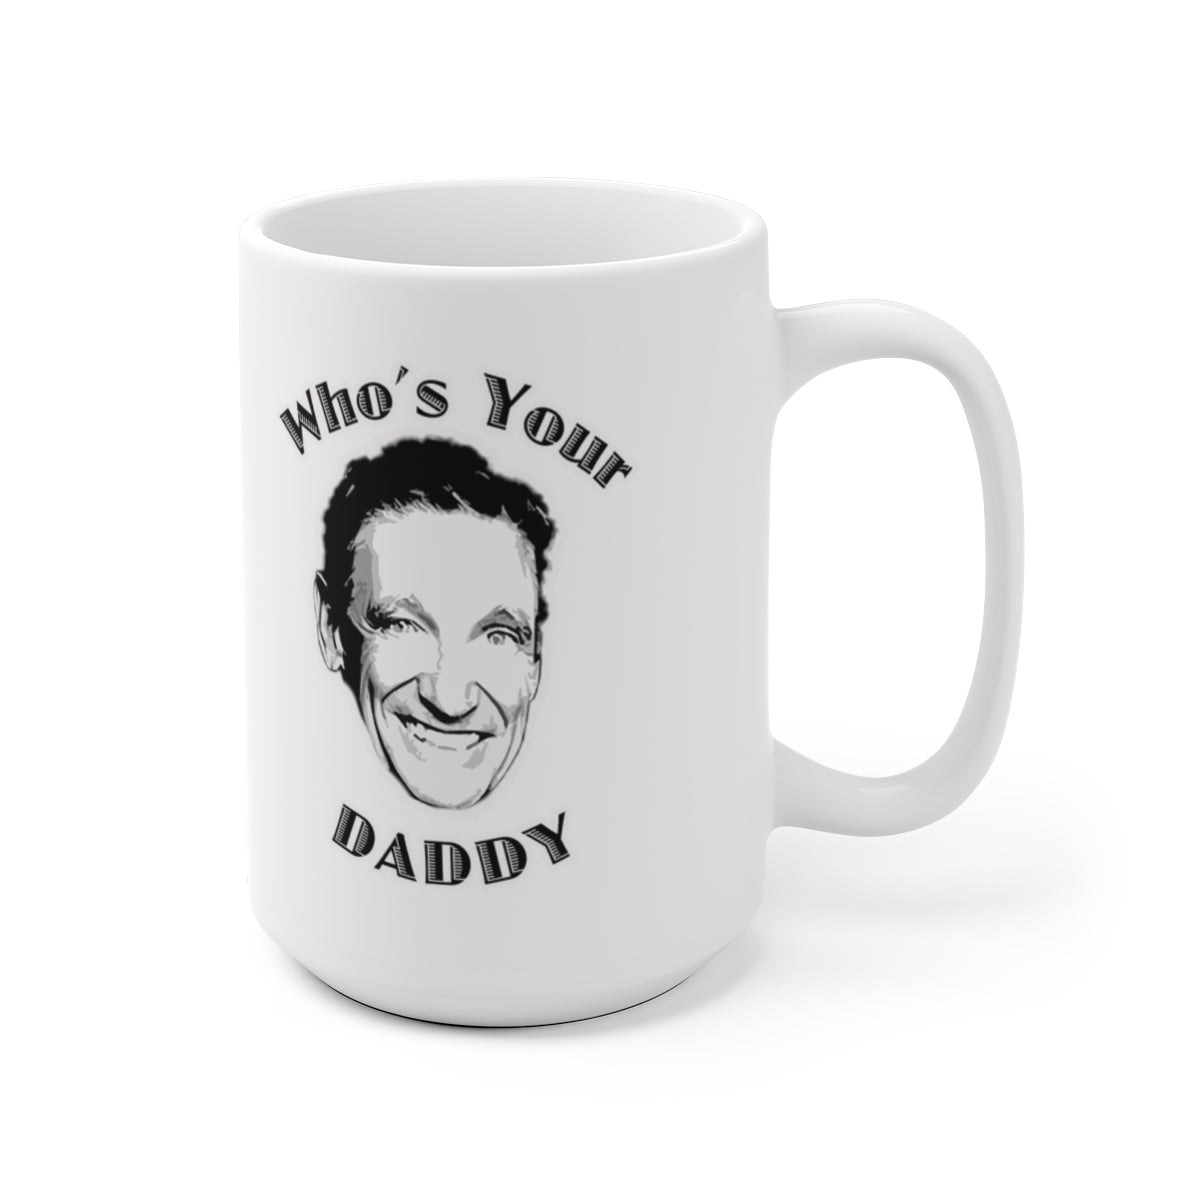 Who's Your Daddy Funny Maury Show Mug